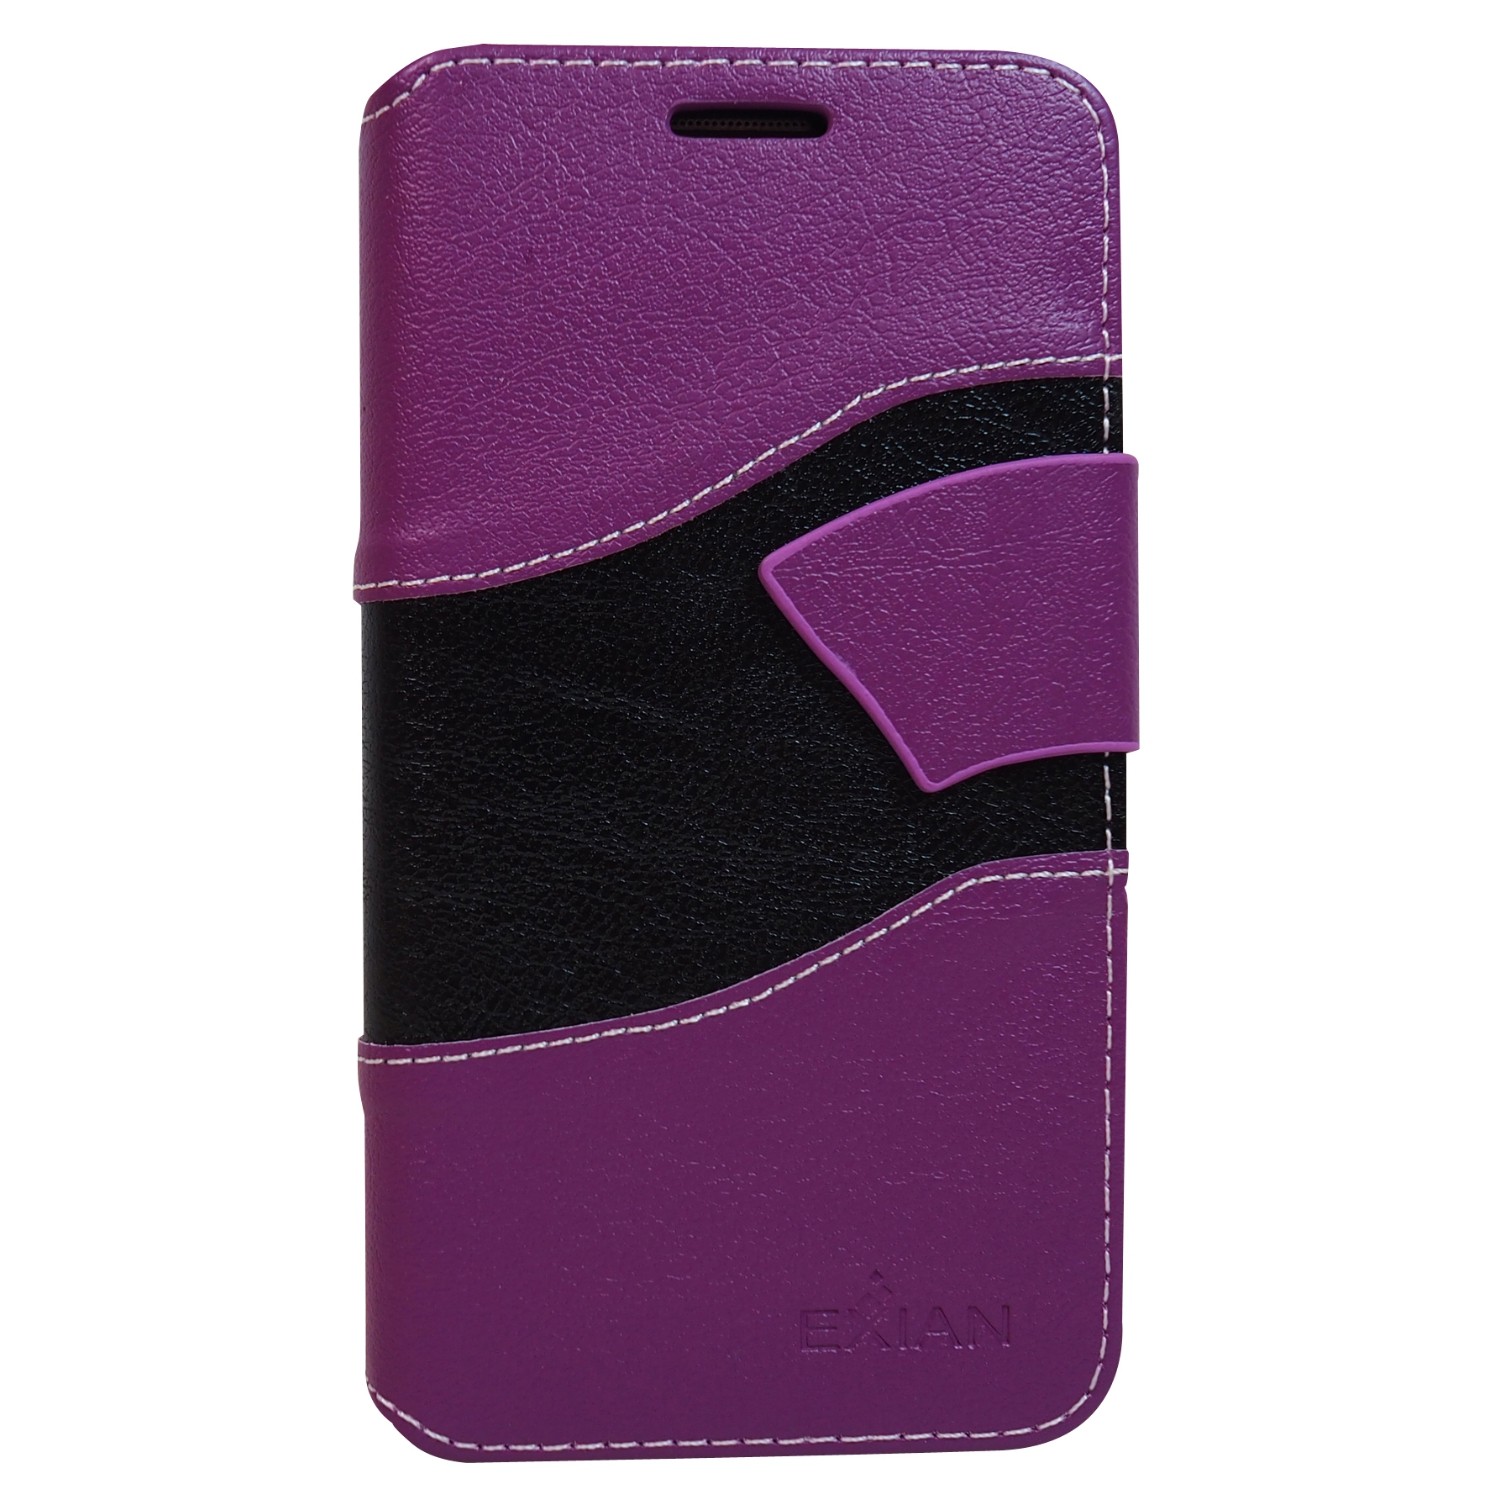 Exian Fitted Soft Shell Case for Samsung Galaxy Grand Prime - Black;Purple